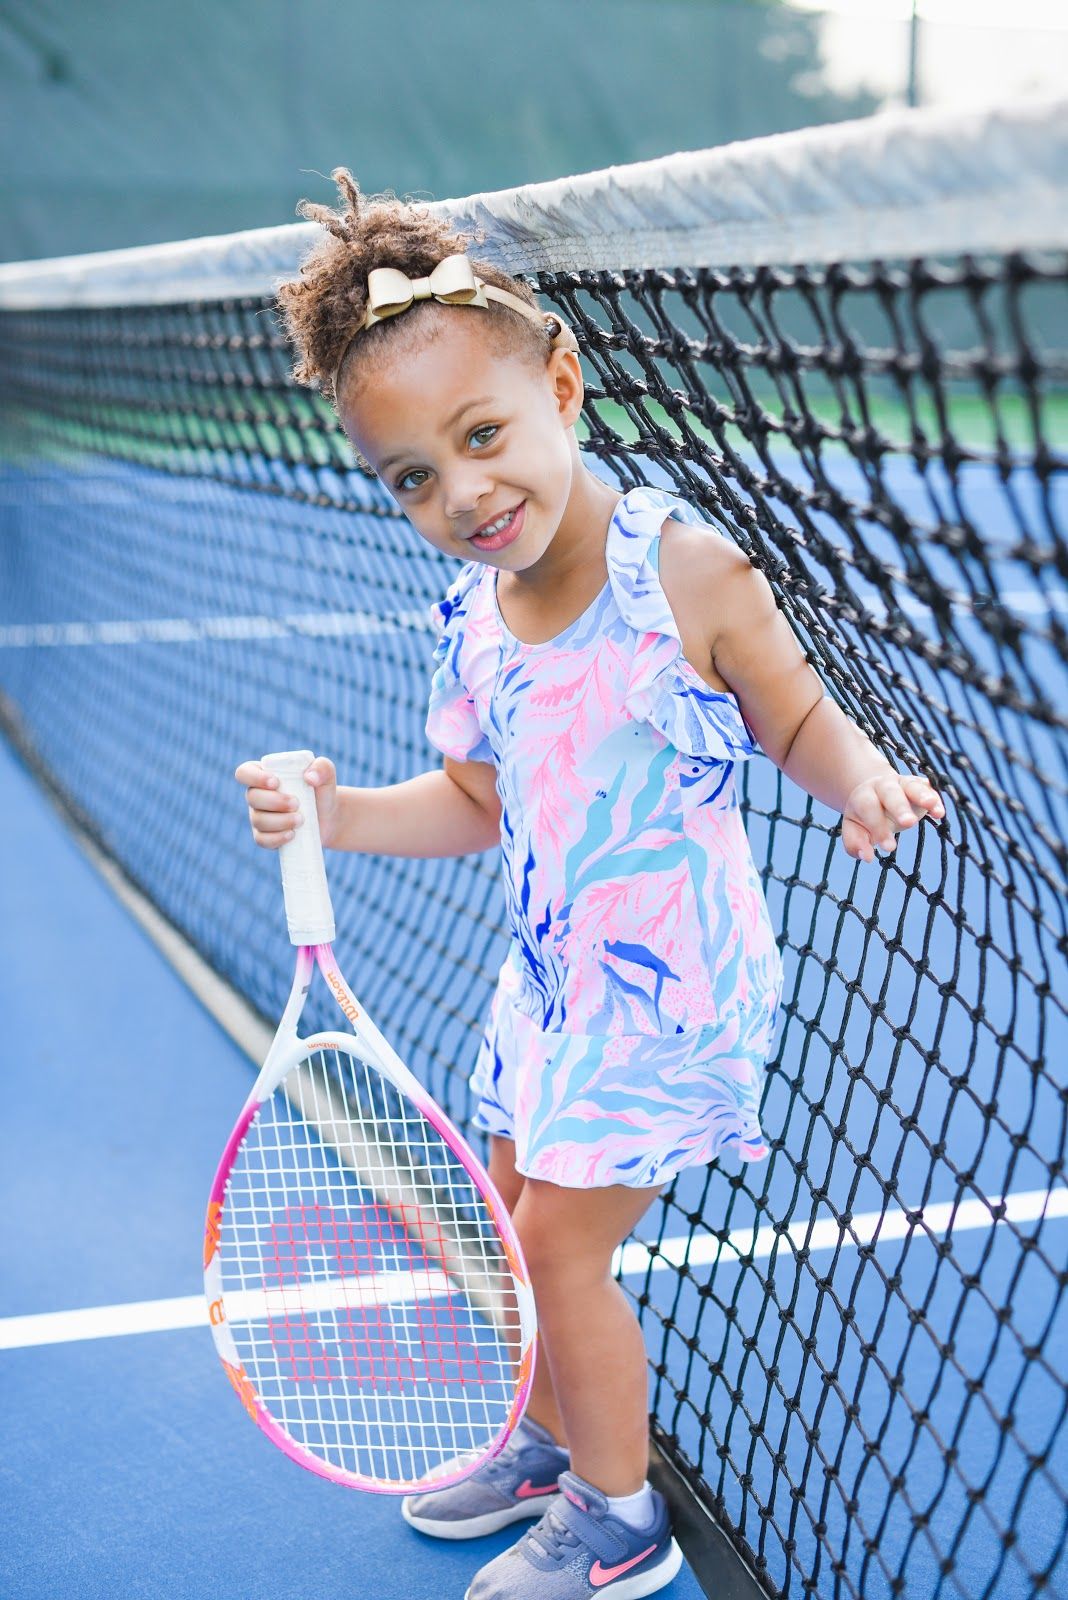 Child with auditory neuropathy spectrum disorder playing tennis